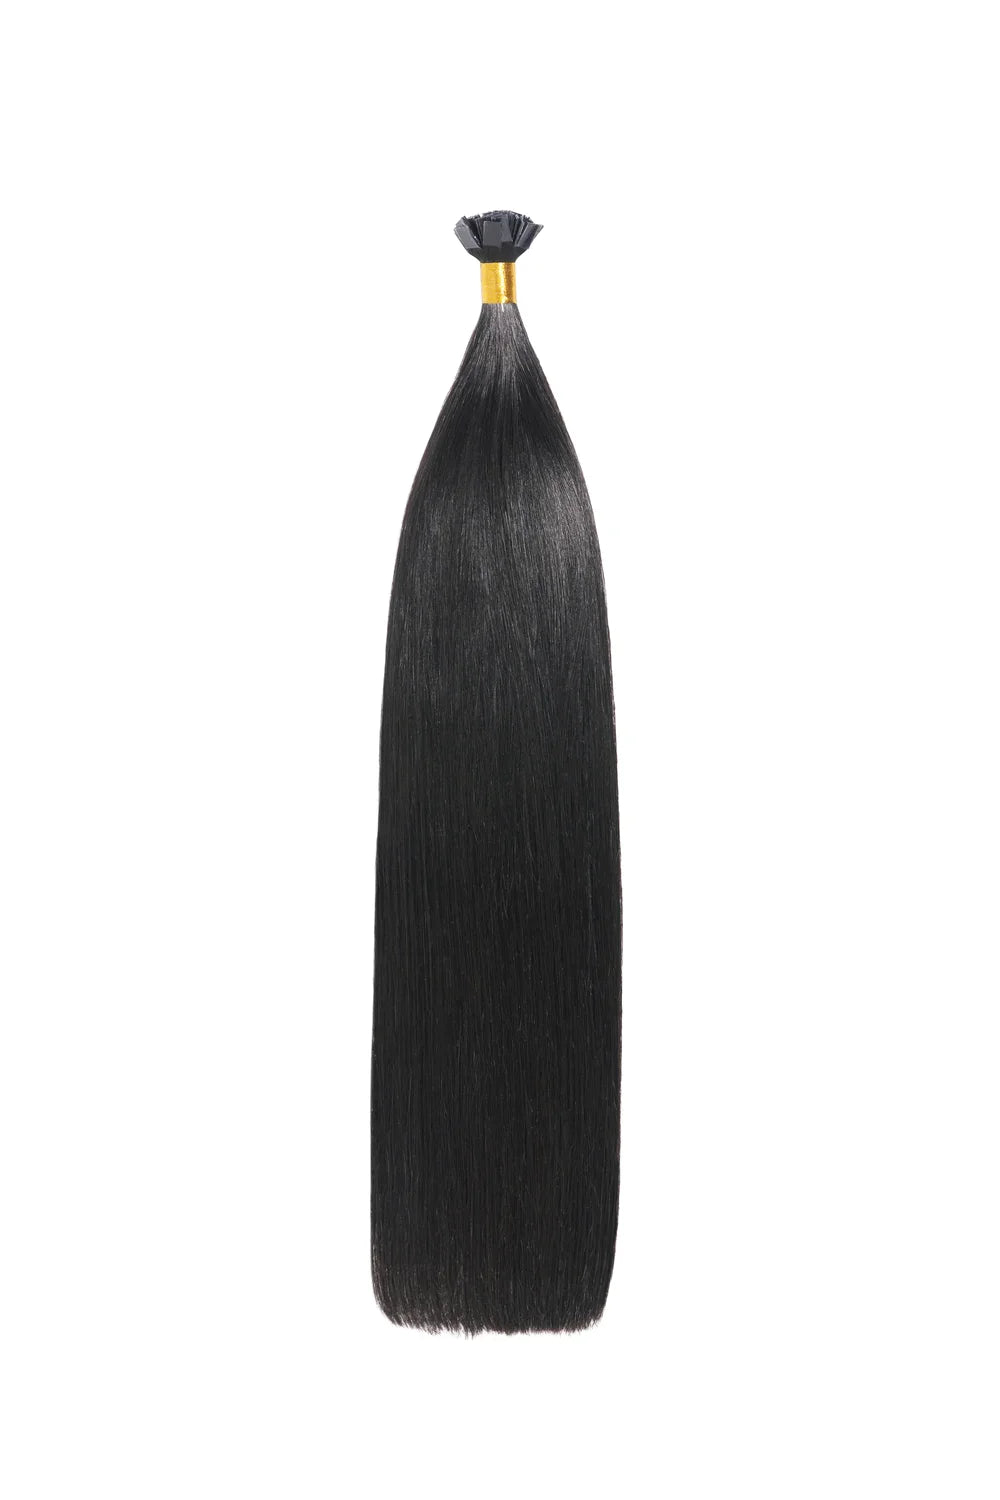 Off/Natural Black (#1B) Remy Royale Flat Tip Hair Extensions